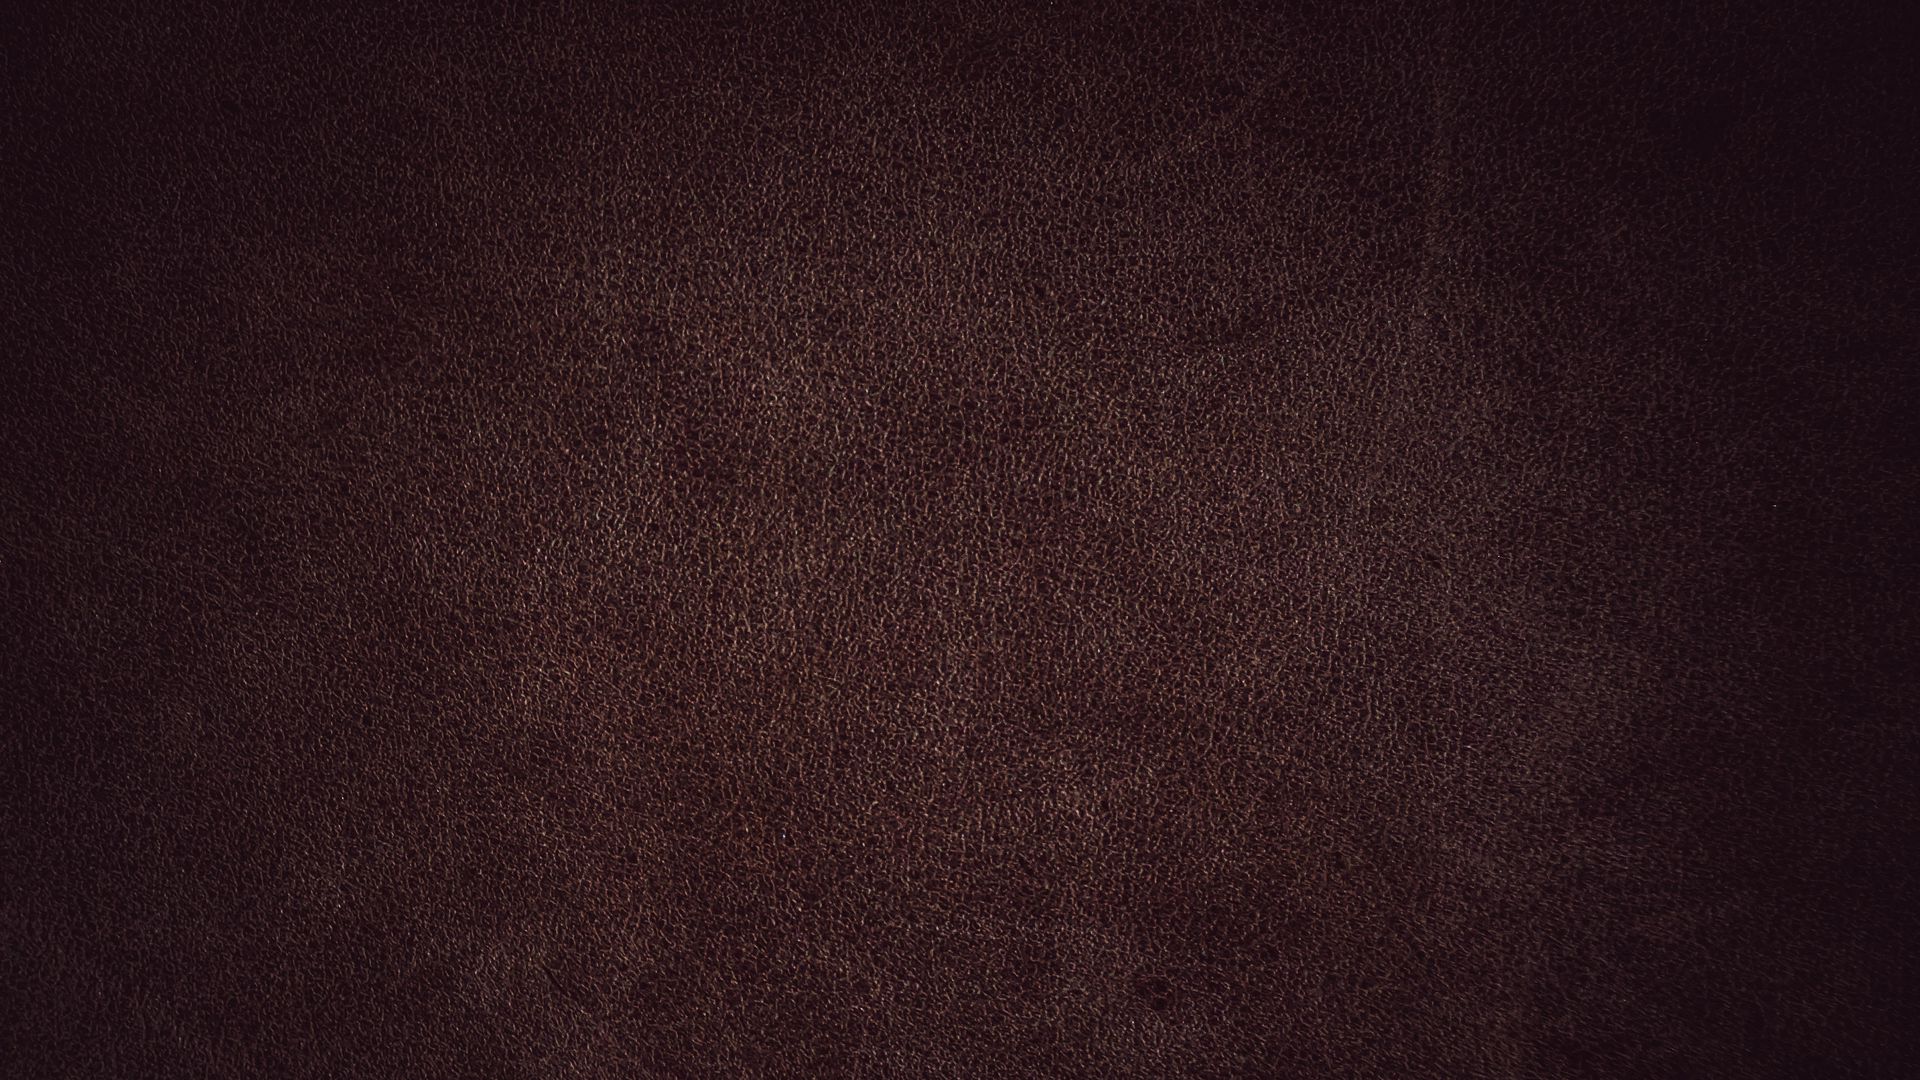 Download wallpaper 1920x1080 leather, texture, surface full hd, hdtv, fhd,  1080p hd background